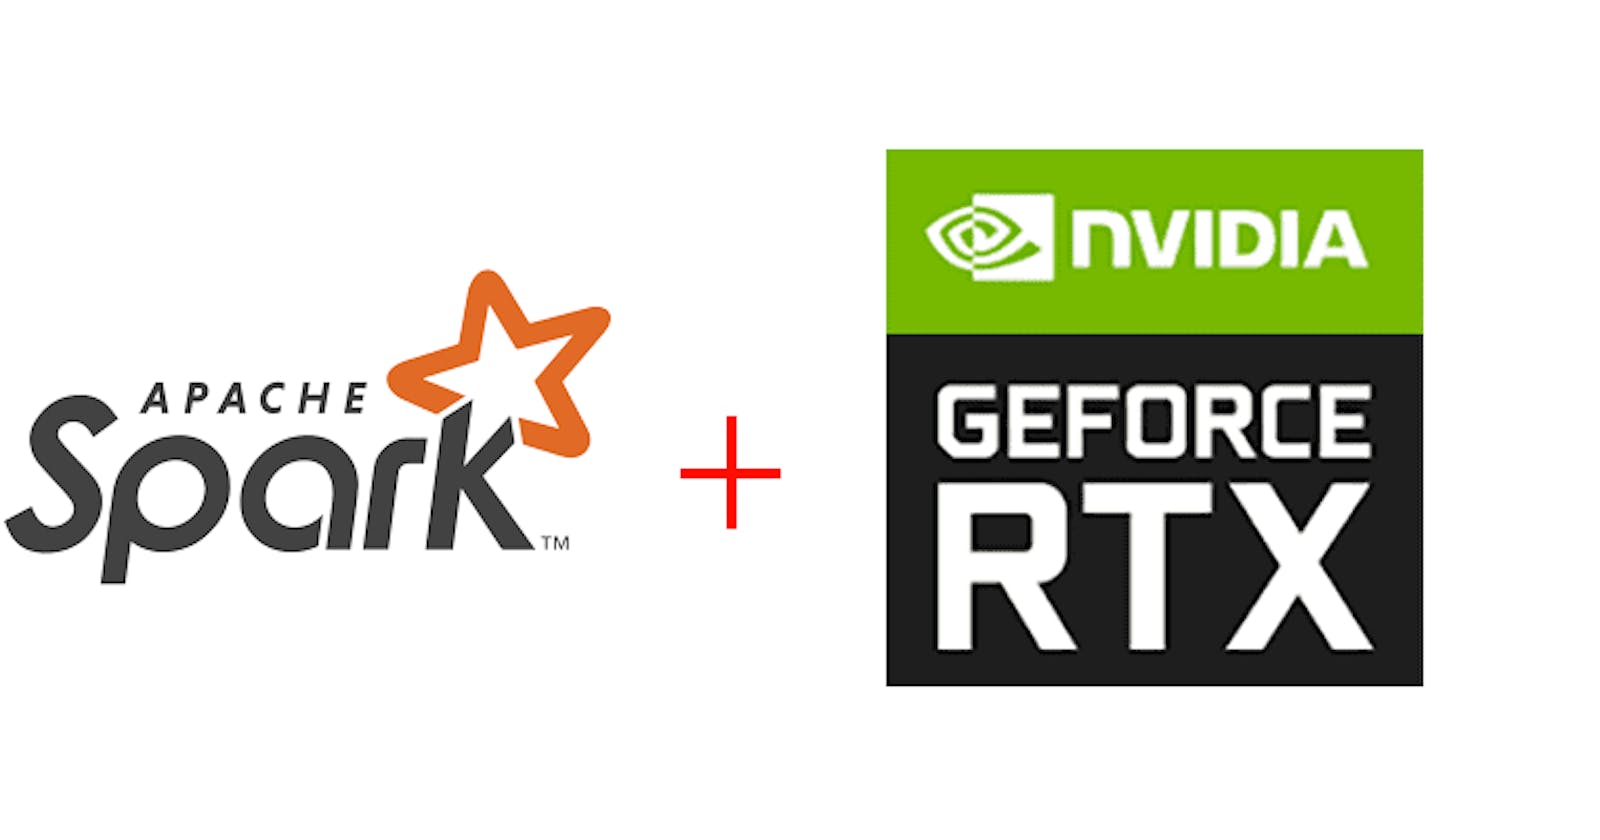 How to run Spark 3.0 applications on your GPU